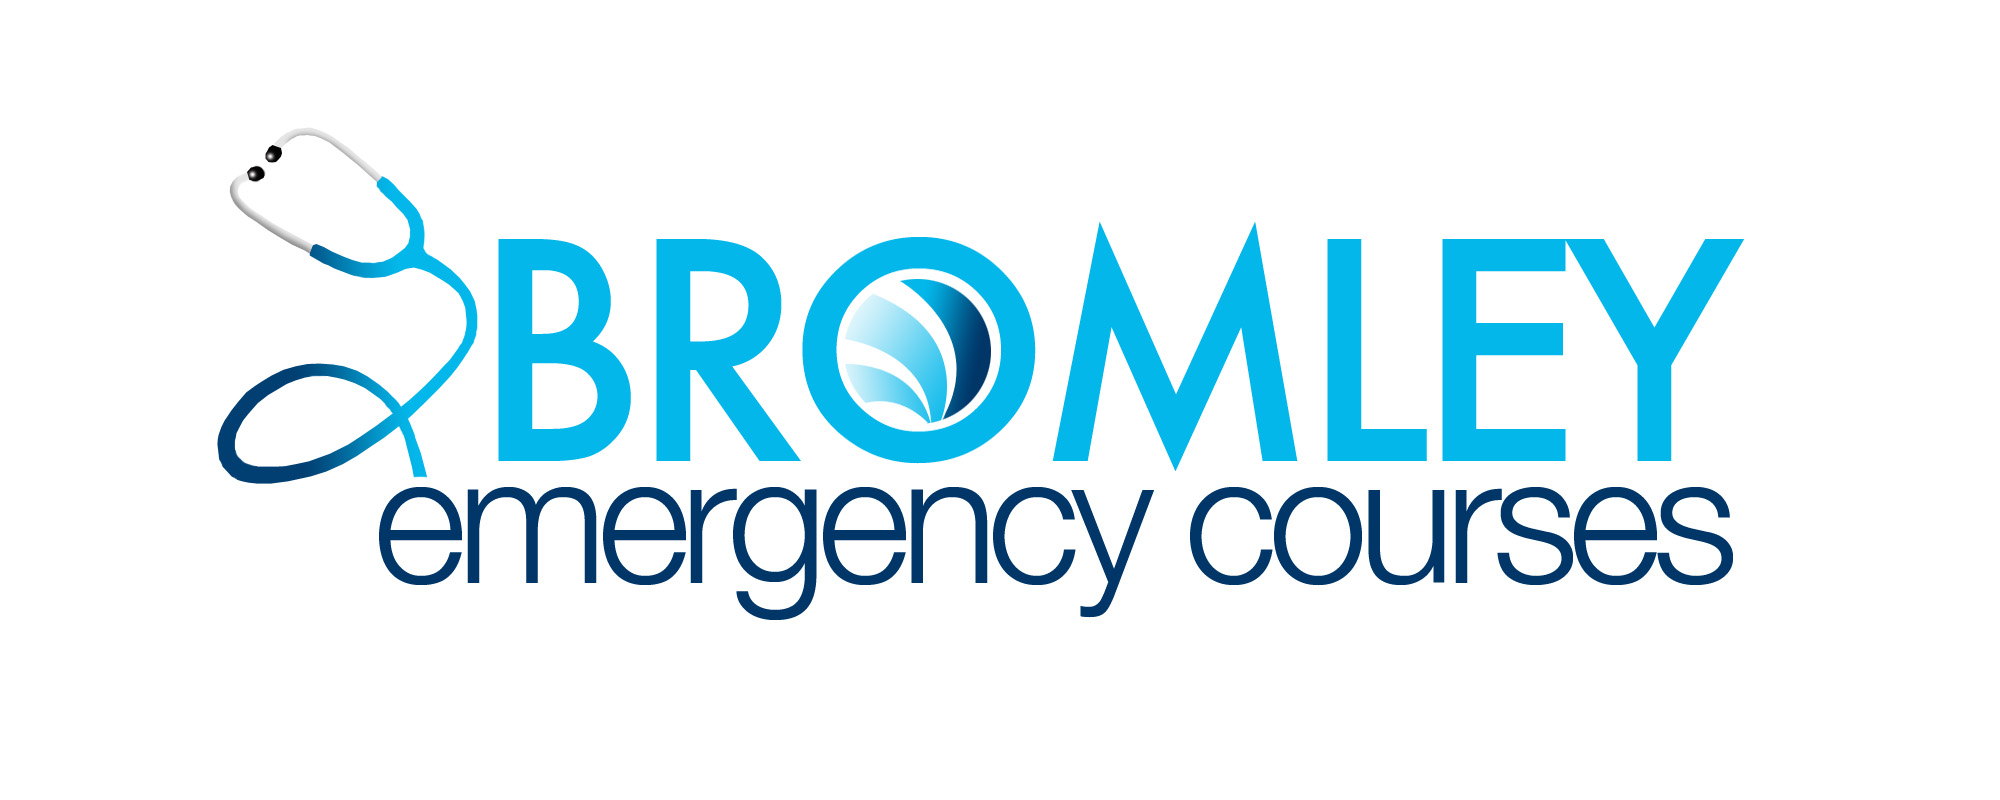 List of Bromley Emergency Courses (multiple dates available)